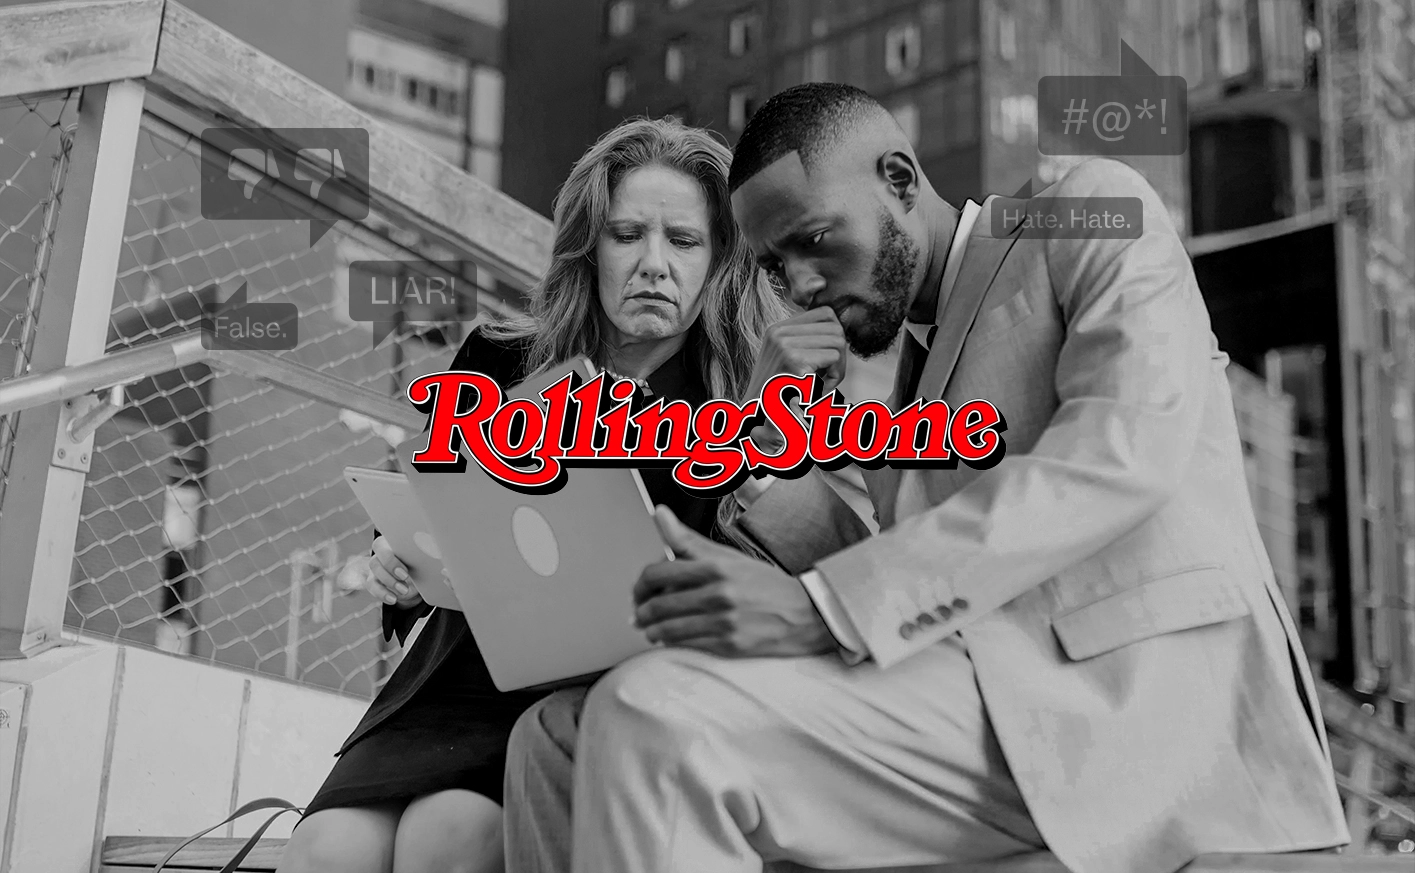 alt="Two people look at a laptop with hate speech comments surrounding them. The Rolling Stone logo is on top of this image."